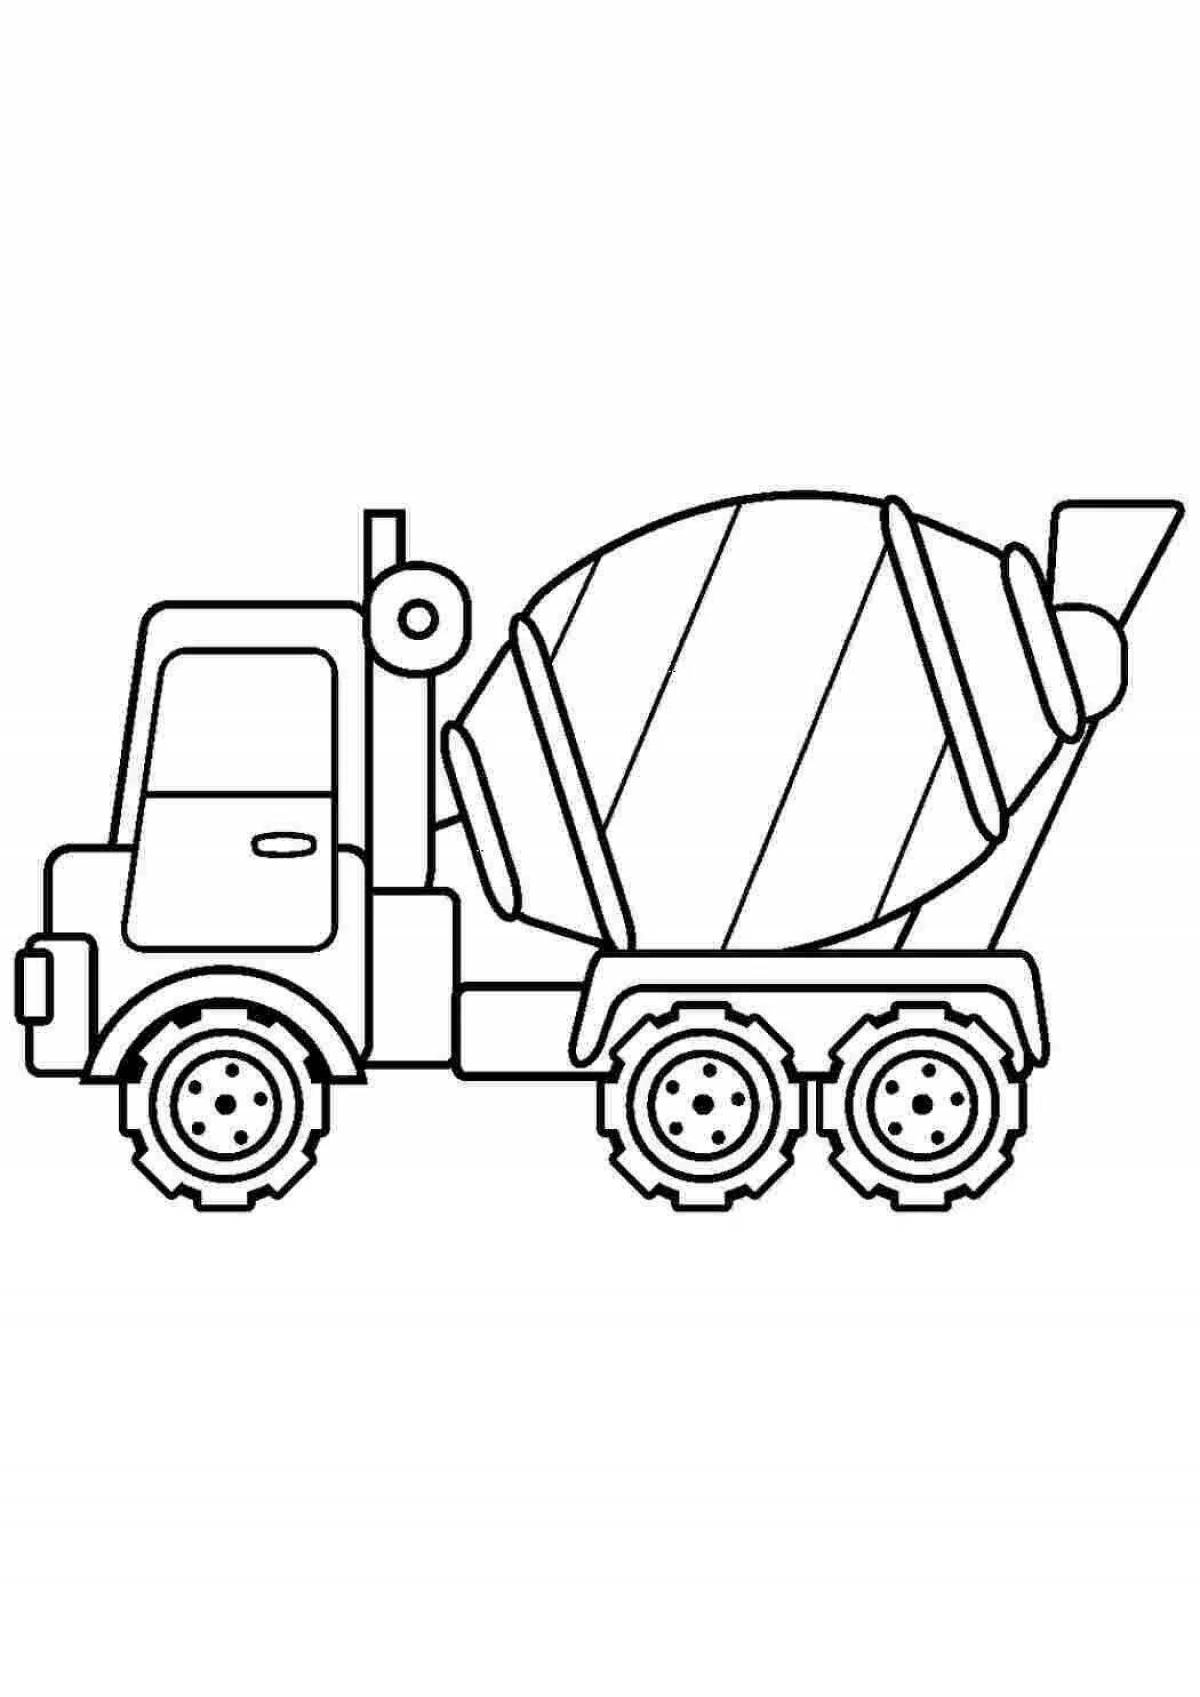 Cars and machines coloring page